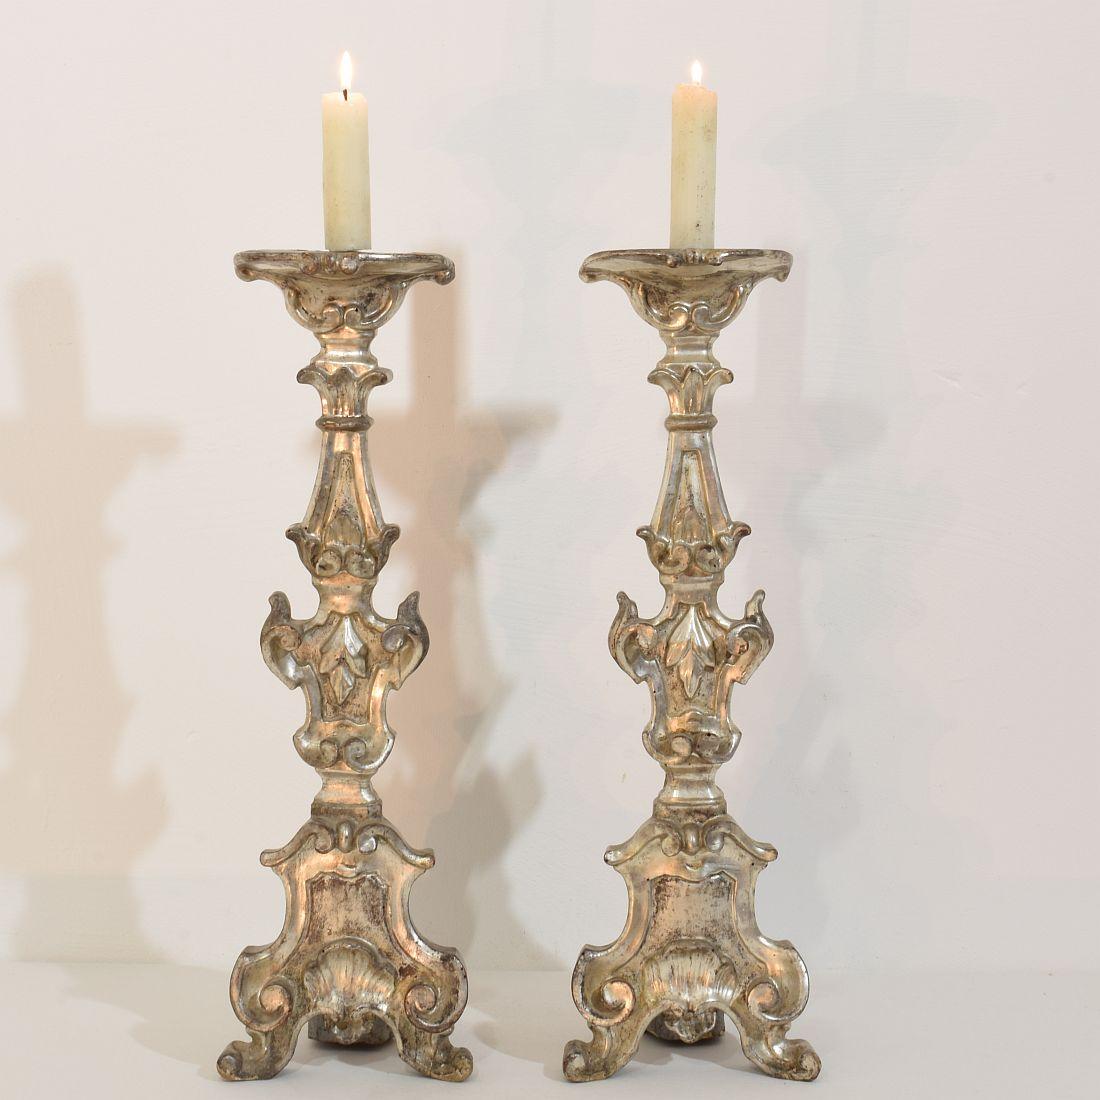 Great pair of carved wooden candleholders with their beautiful silver leaf gilding.
Italy, circa 1750-1800.
Weathered and small losses and old repairs.
More photo's available on request.
Measurements are individual.